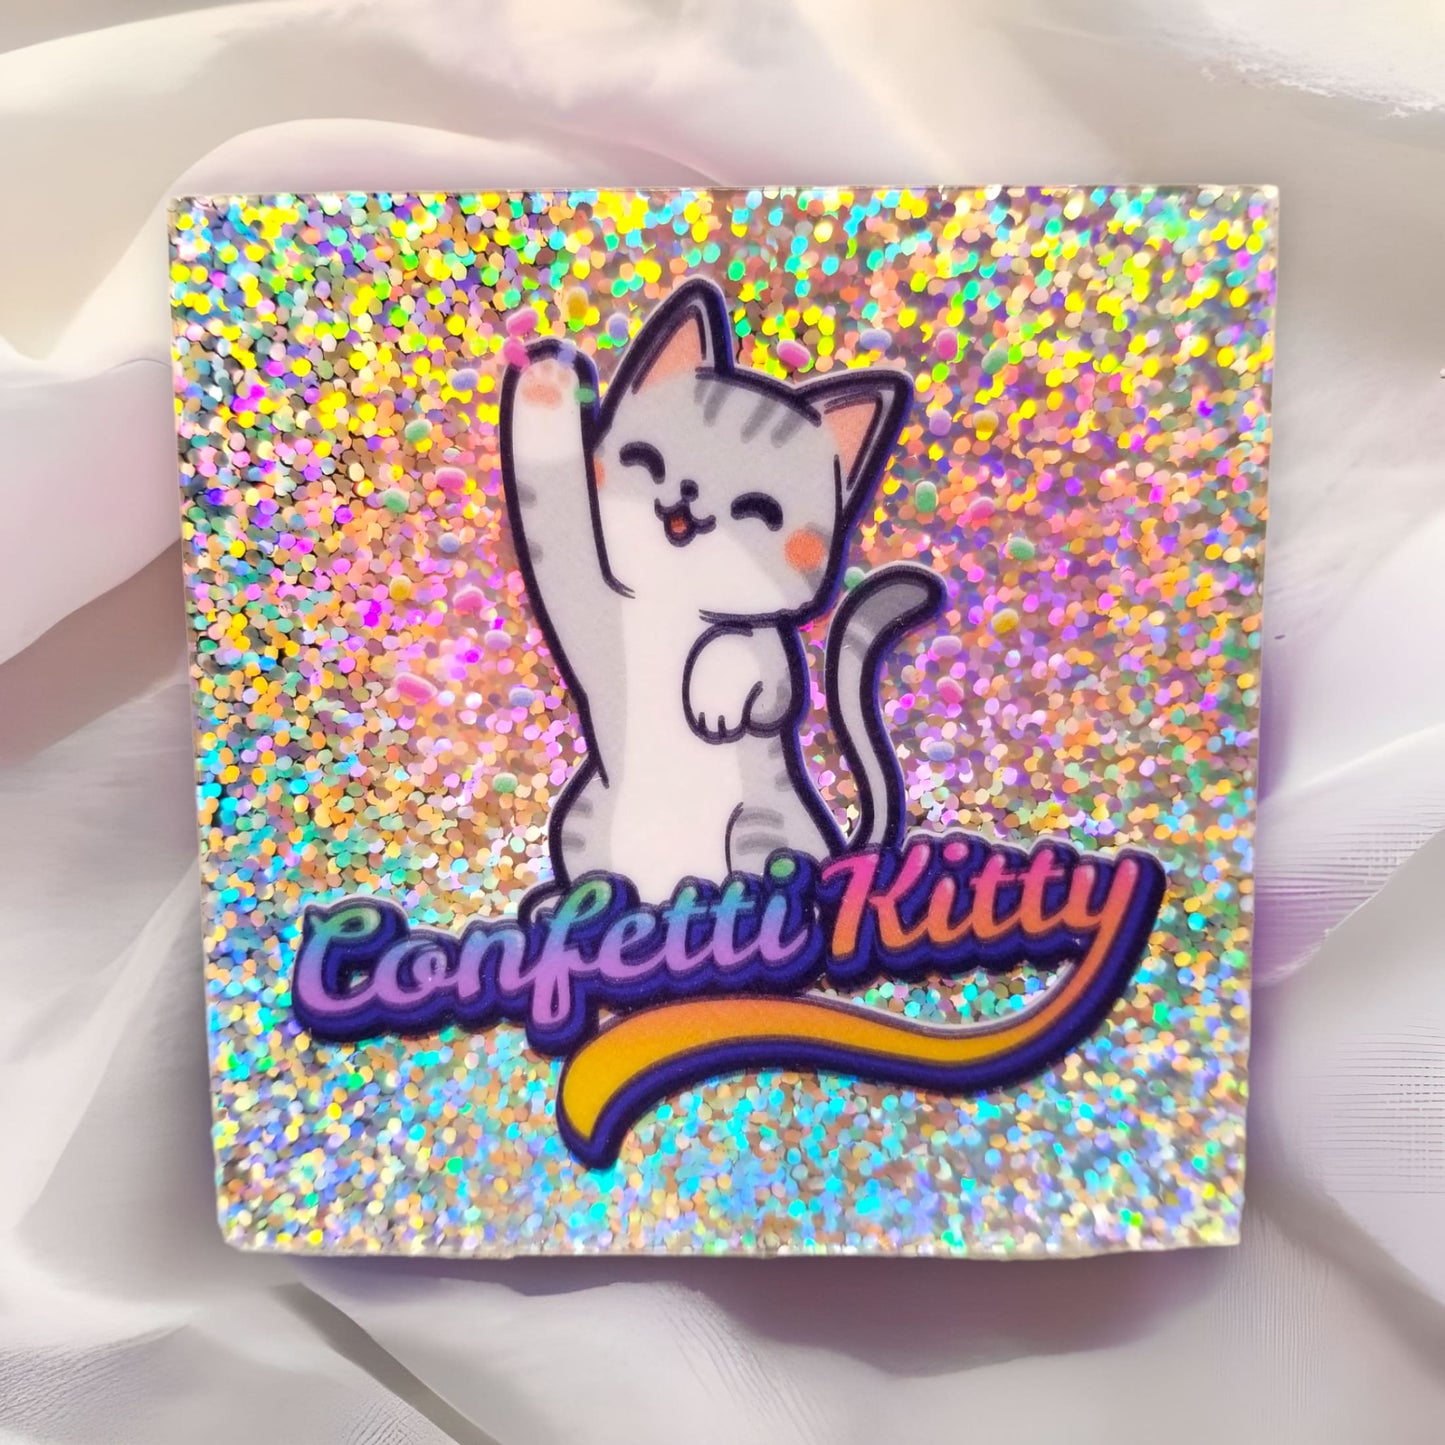 Exclusive! Confetti Kitty Glitter Sticker from Confetti Kitty, Only 5